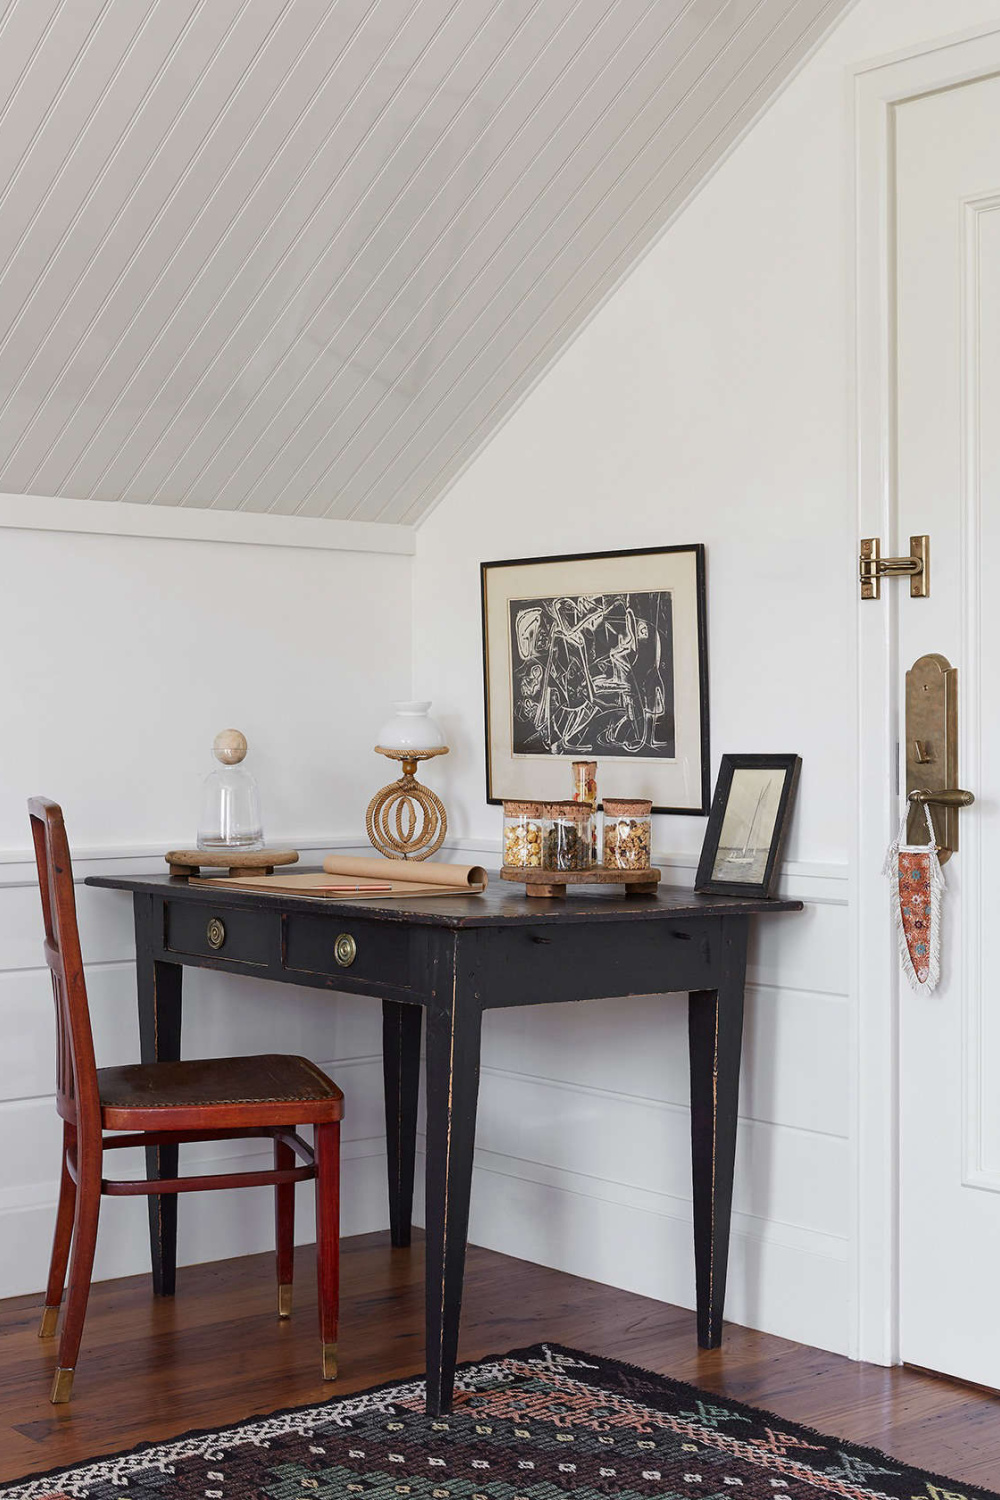 Guests can admire jars of beach finds and fill journals with travel notes at an unpretentious desk in weathered dark paint and a red-stained chairâthe kind of gentle mismatch that seafarers would have created out of heirlooms and purchases.